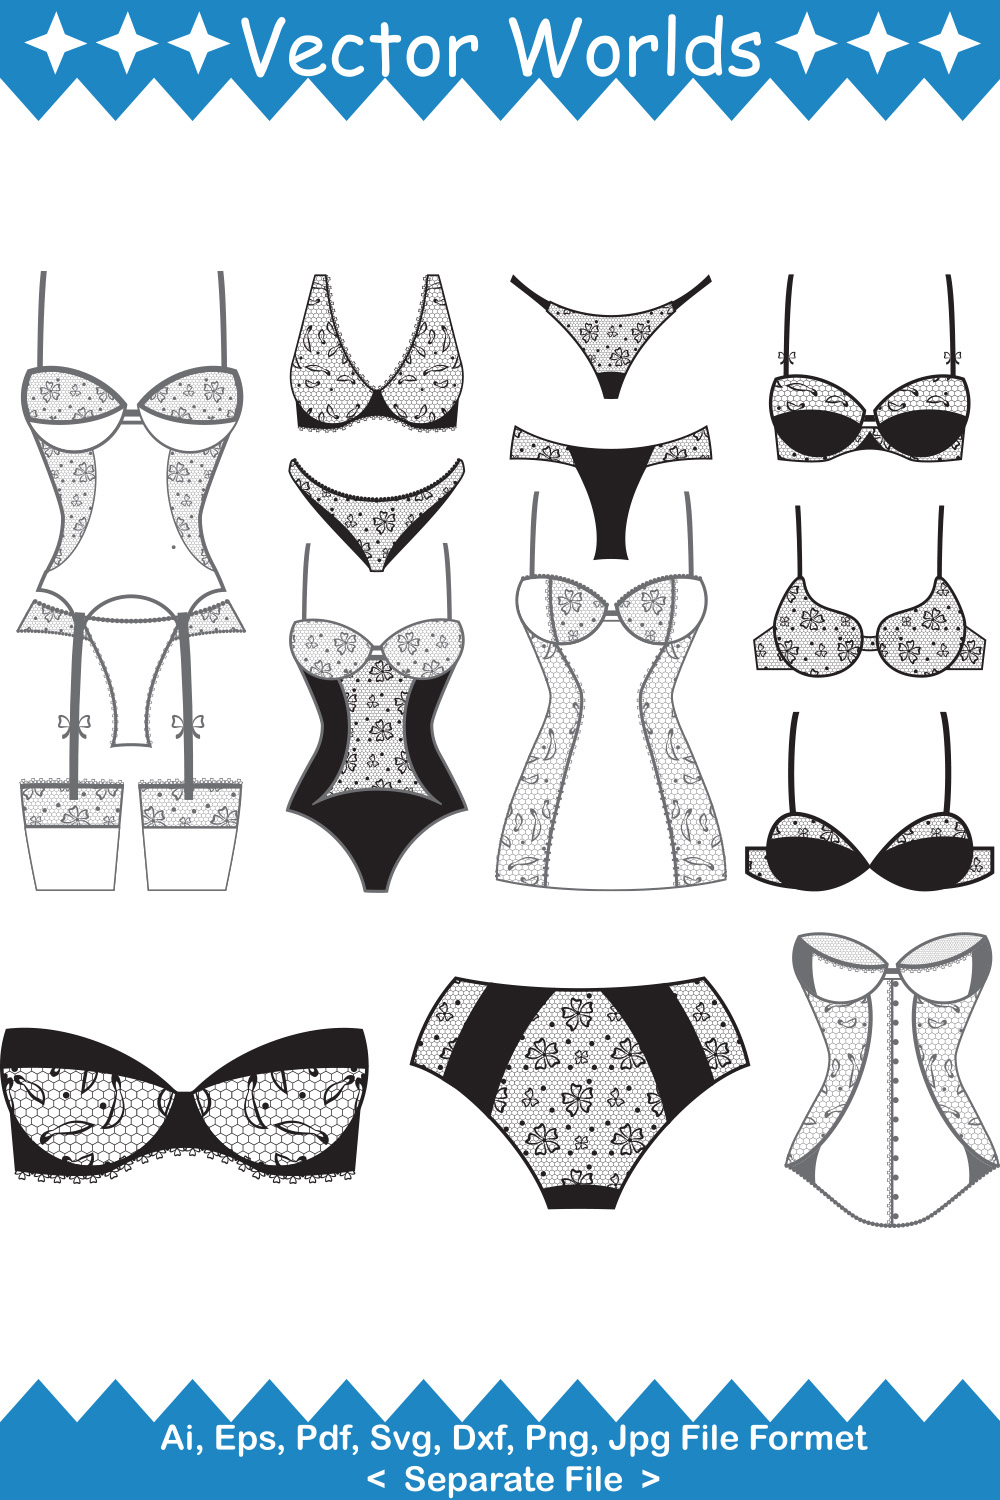 Collection of vector exquisite images of lingerie silhouettes.